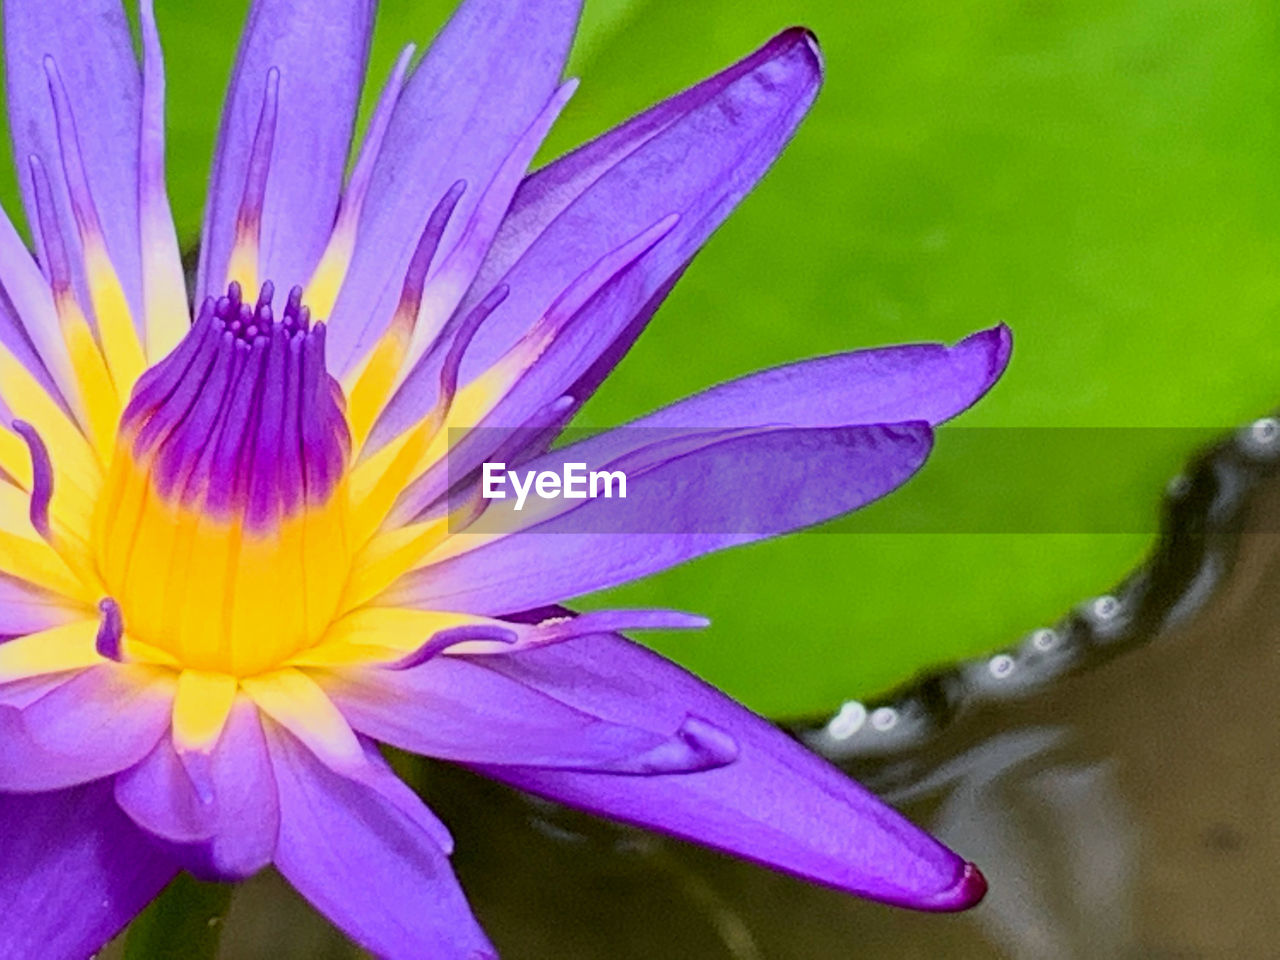 CLOSE-UP OF PURPLE FLOWER WITH WATER DROPS